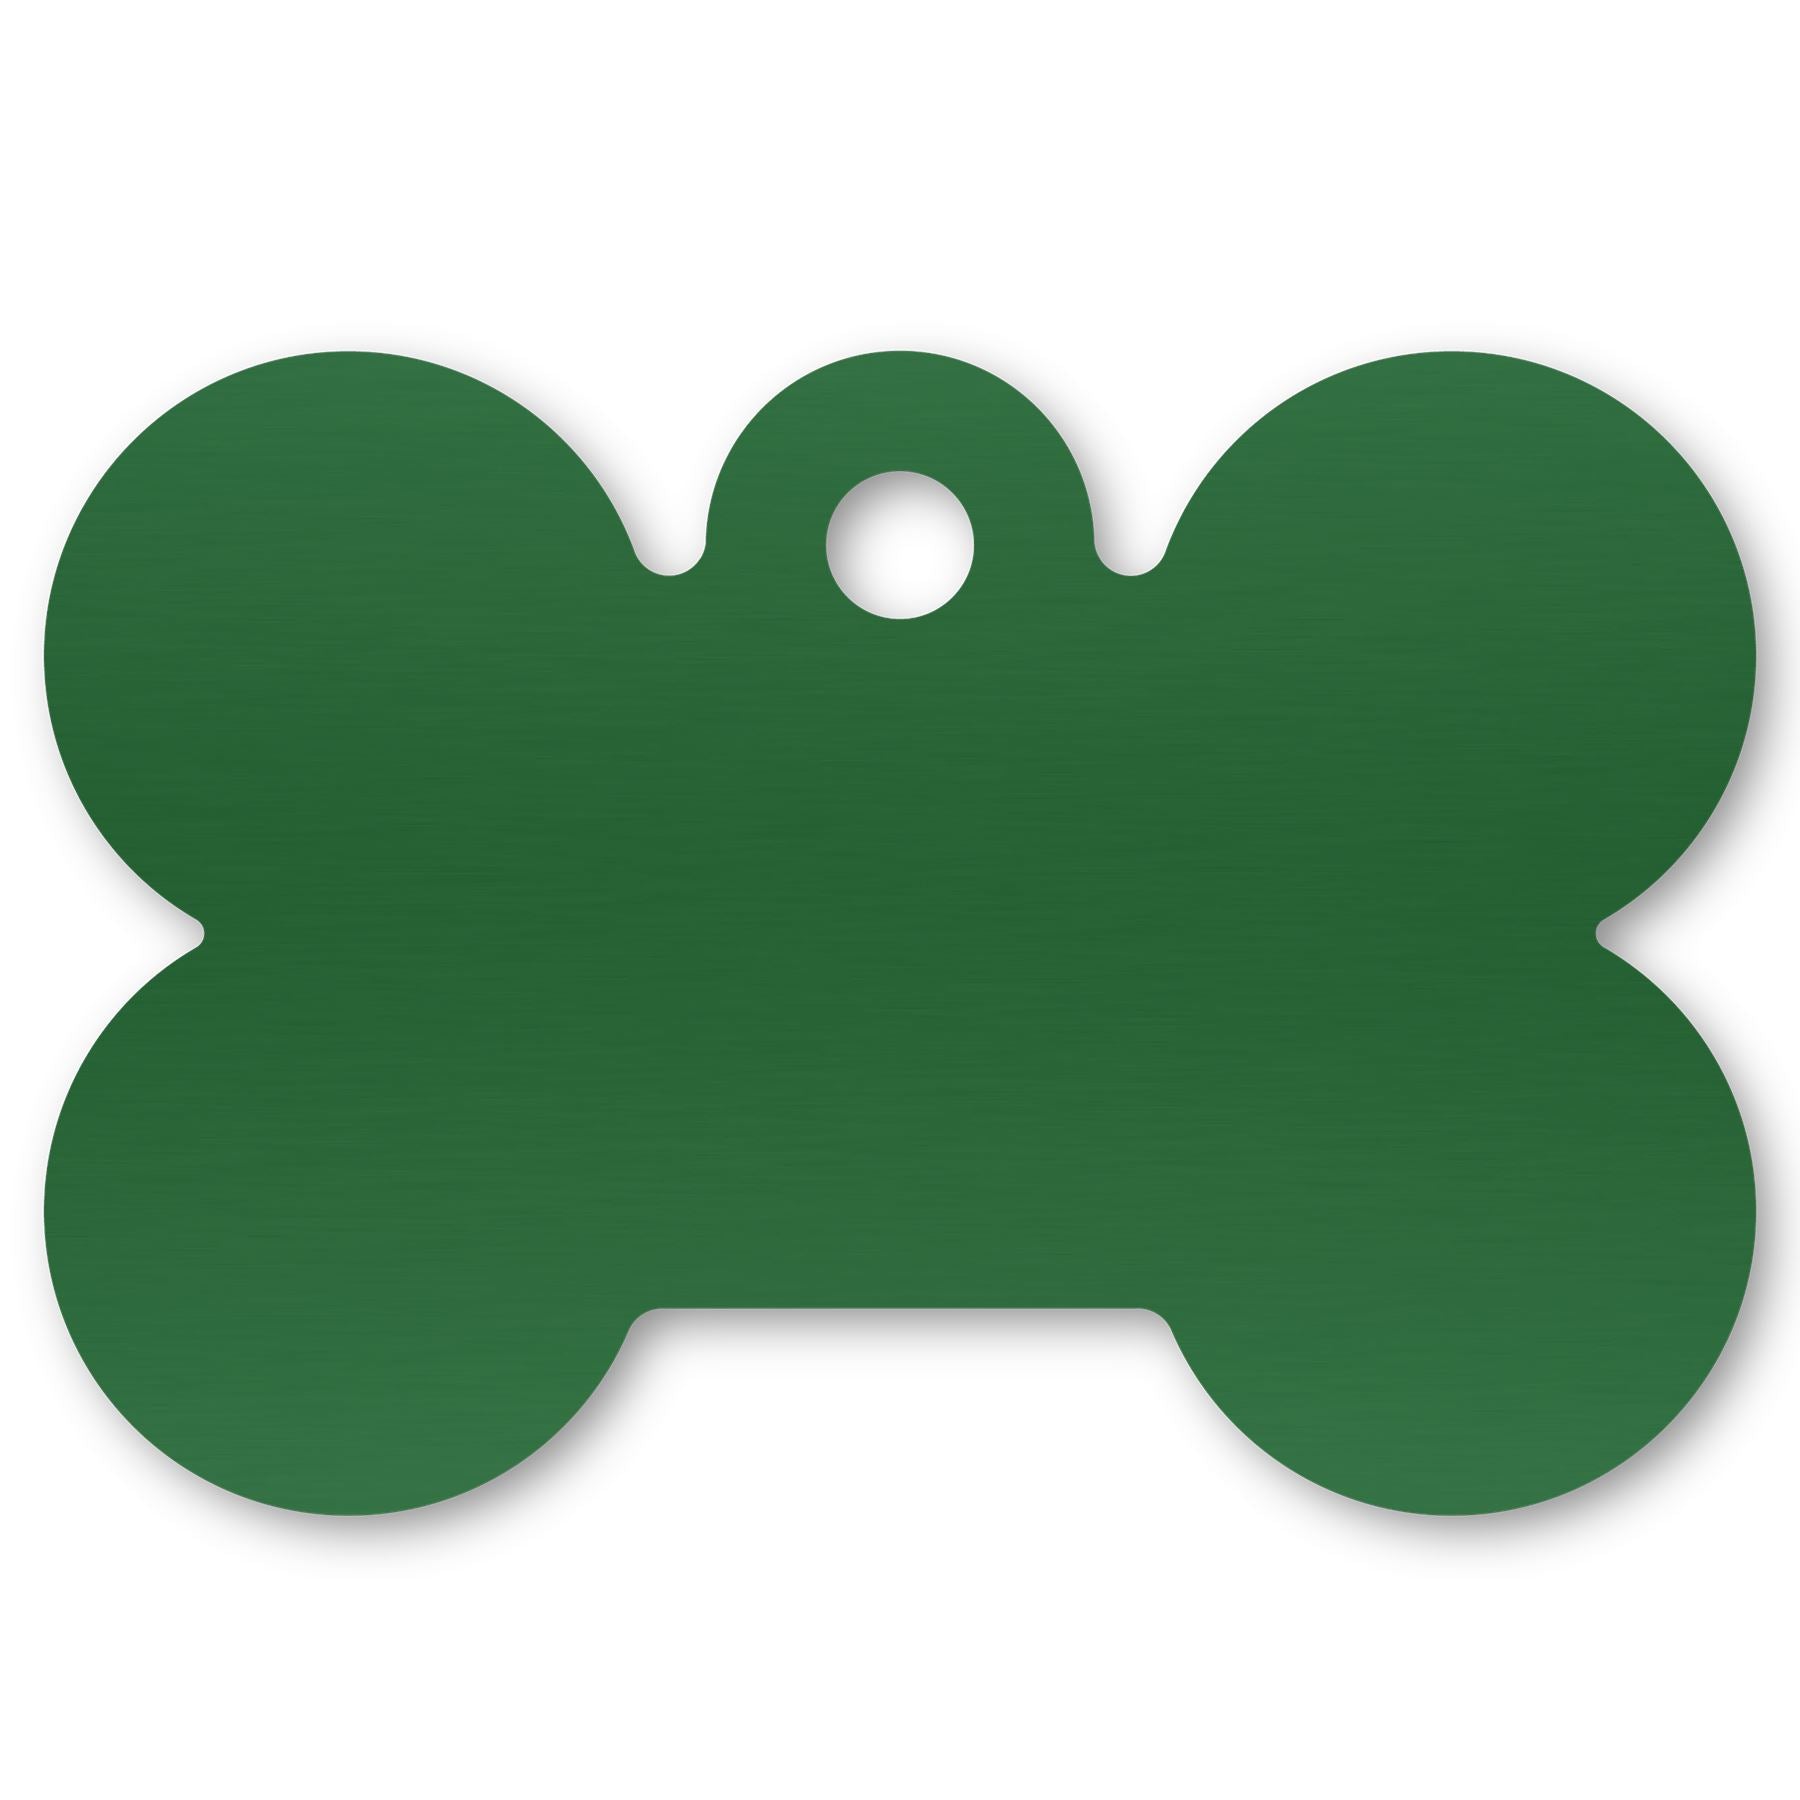 Anodized Aluminum Dog Bone Shaped Tags, 7/8" x 1-3/16" with 3/32" Hole, Laser Engraved Metal Tags Craftworks NW Green 